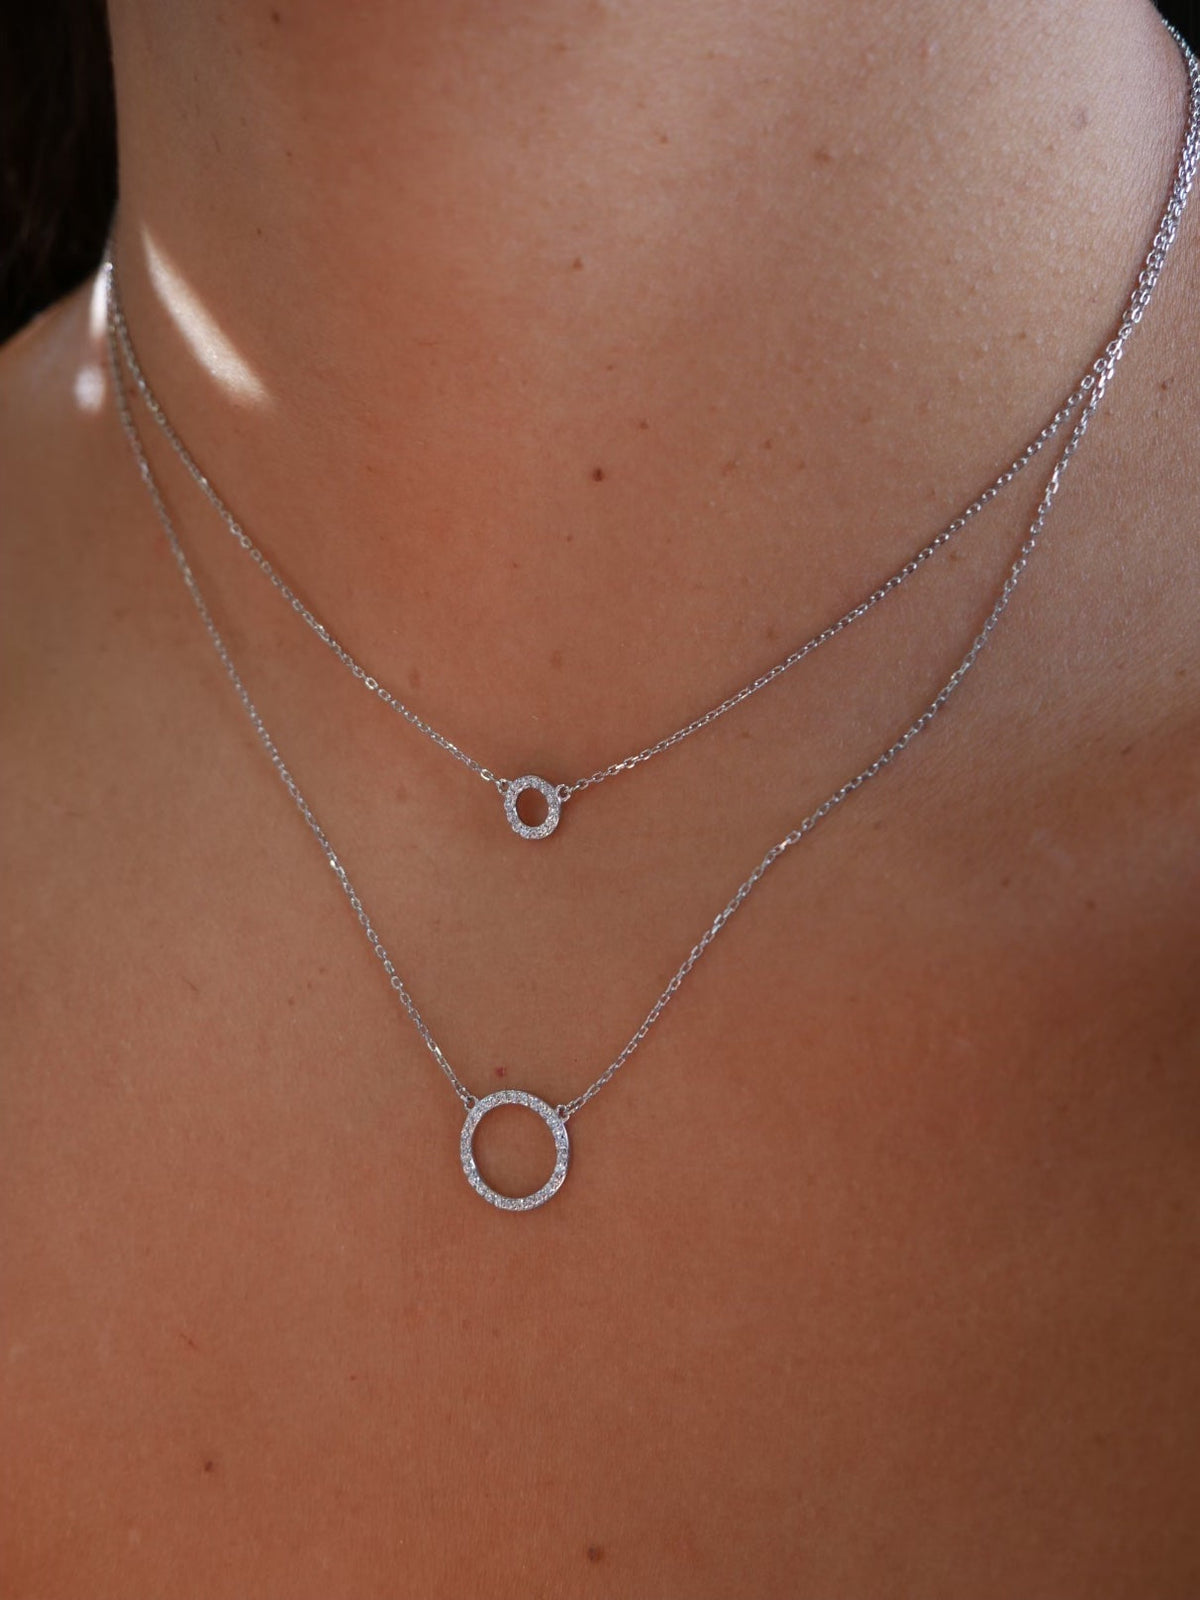 Dainty Necklaces, sterling silver, .925, circle necklaces, layered, two in one necklace, hypoallergenic, luxury, designer, waterproof, nickel free, tiffanys, prada, love necklace, casual everyday necklaces, accessories, fashion jewelry, popular necklaces, instagram shop, tiktok brands, kesley boutique, jewelry store in Miami, Brickell